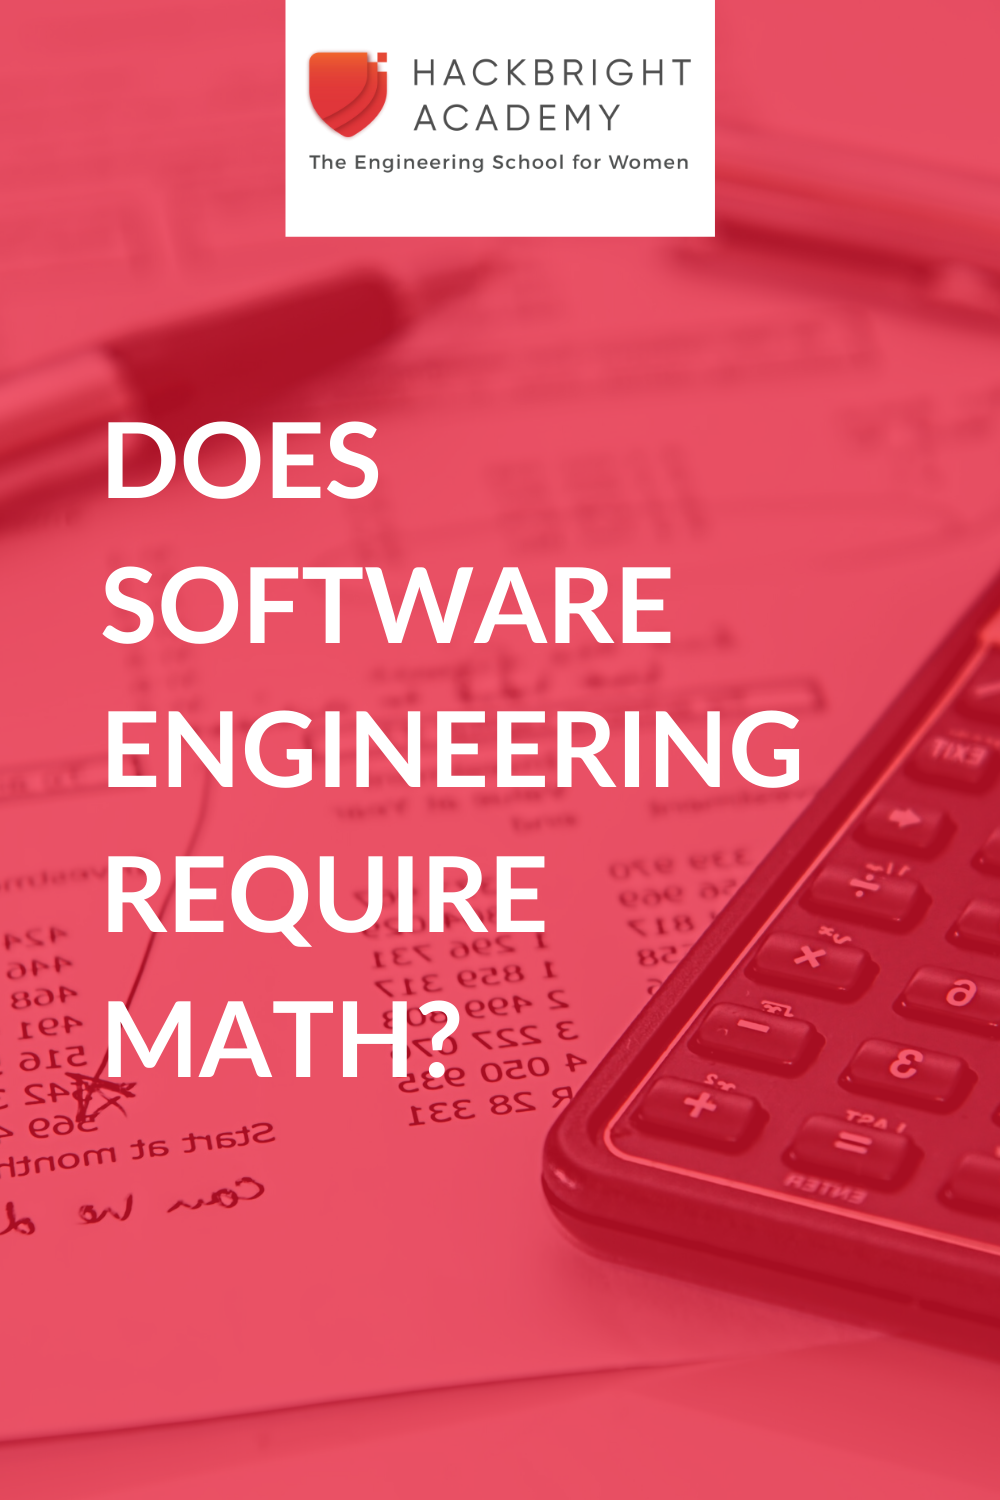 Does software engineering require math?